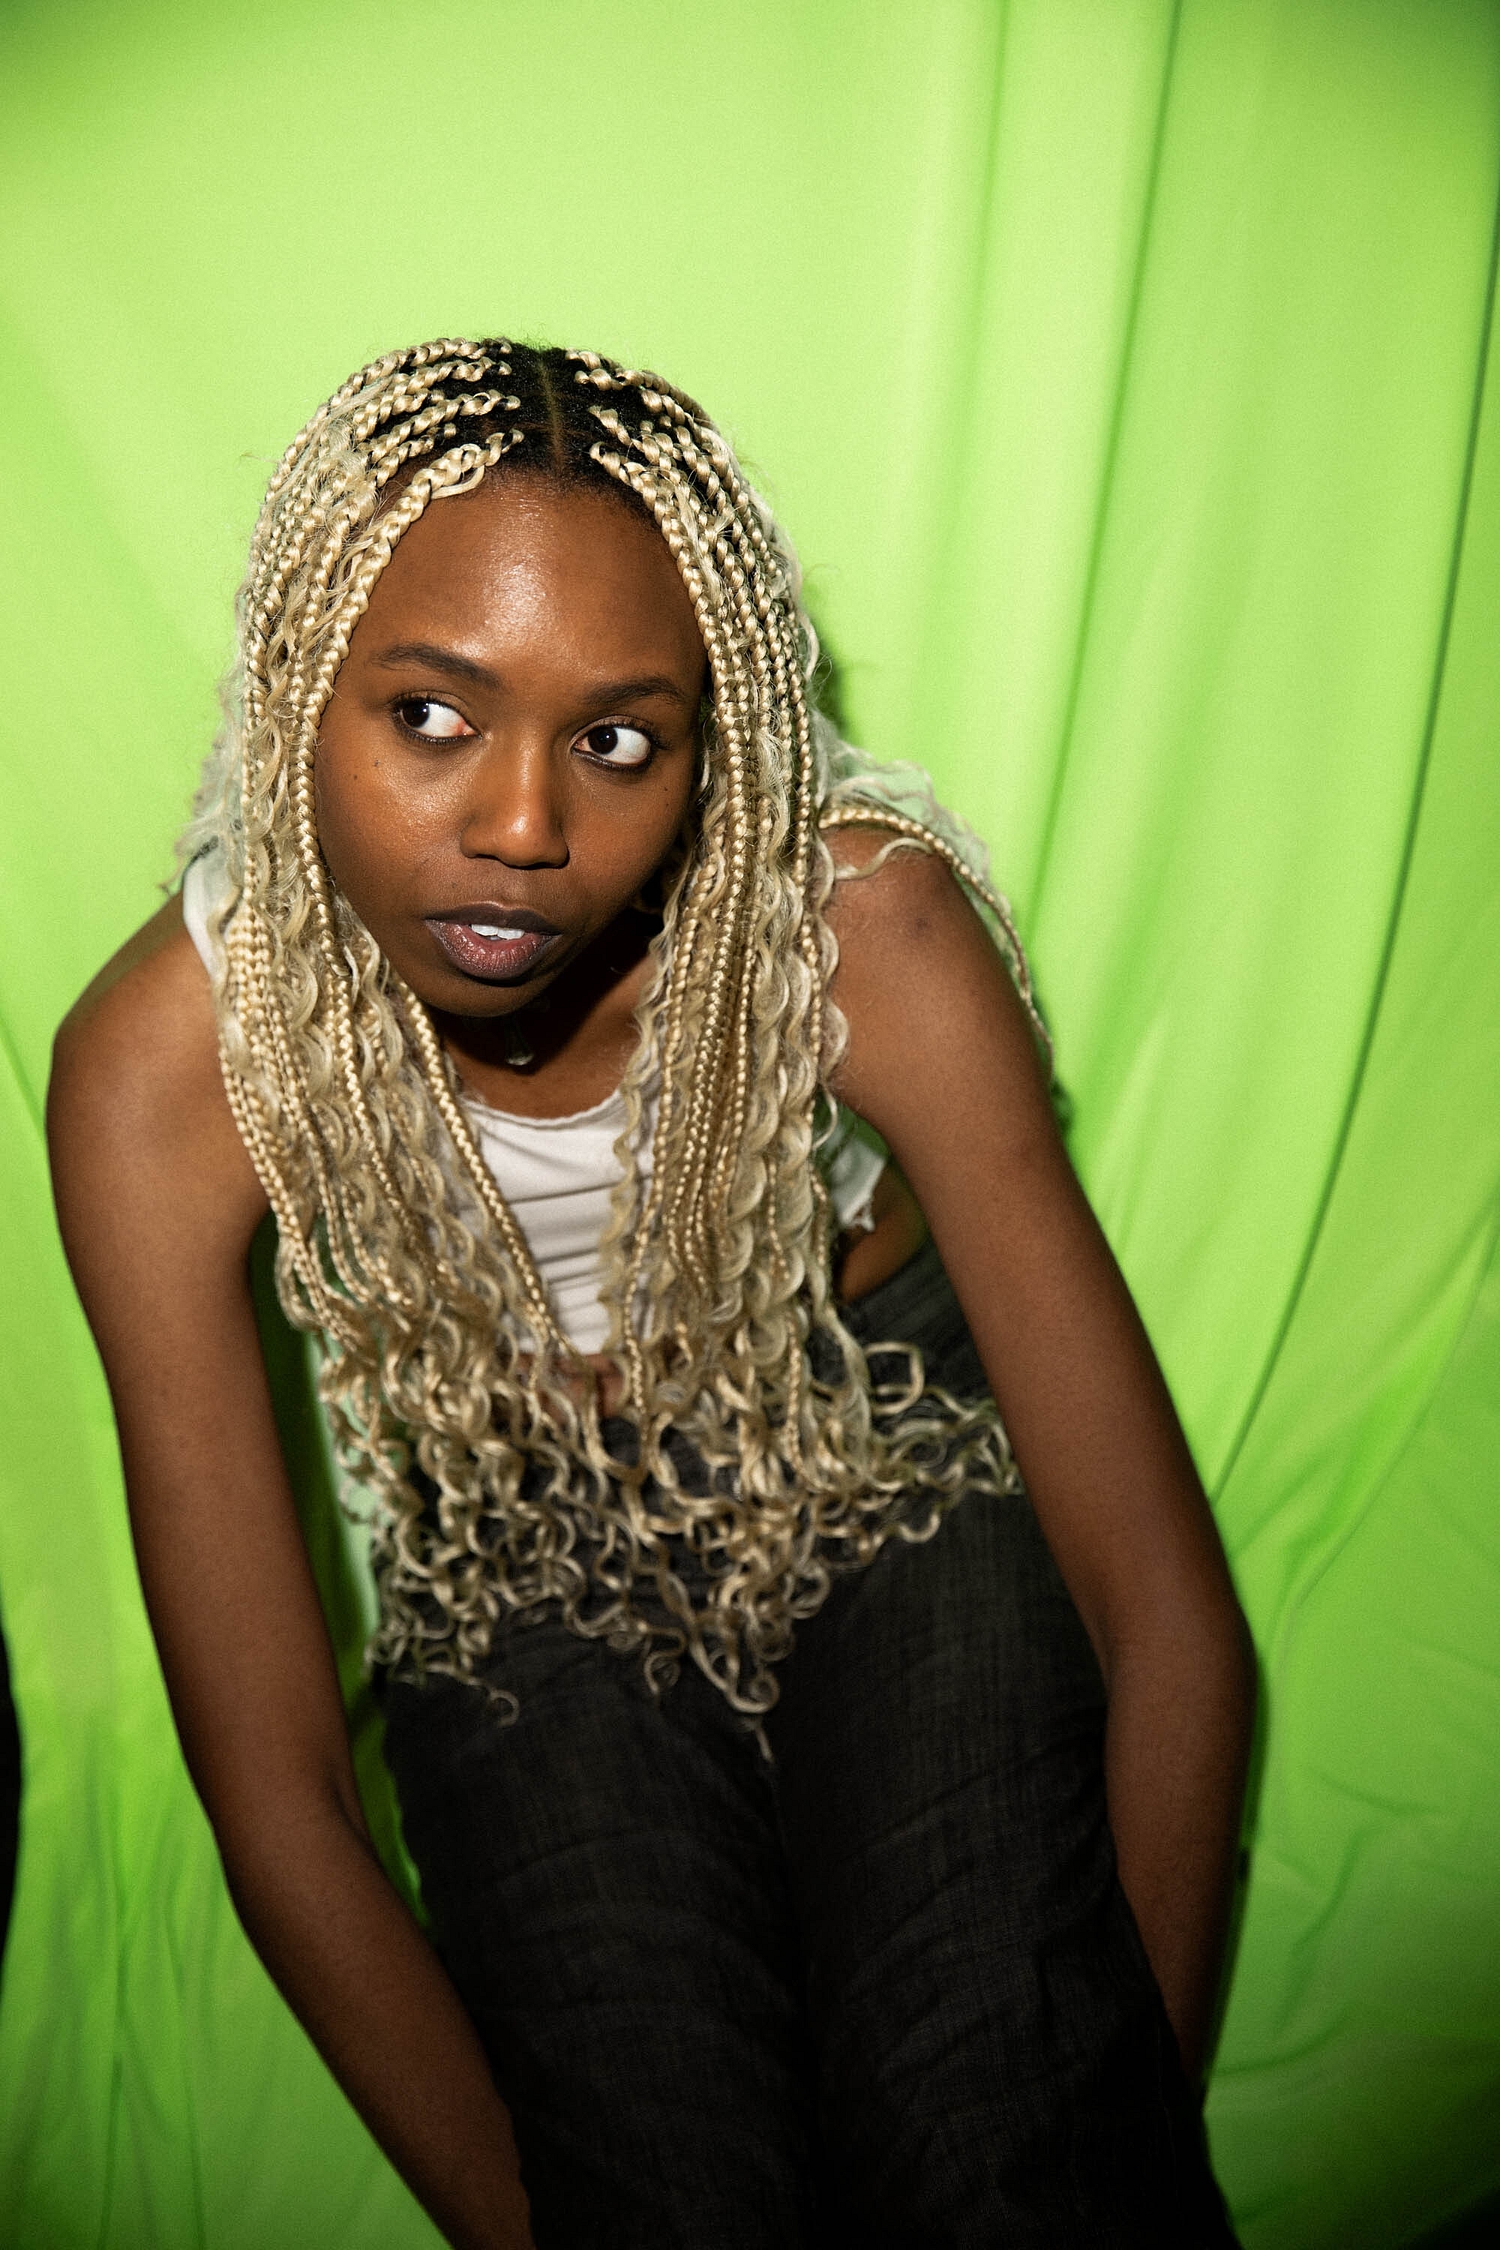 SPIDER talks being a Black woman in alternative music and her new EP 'an object of desire'